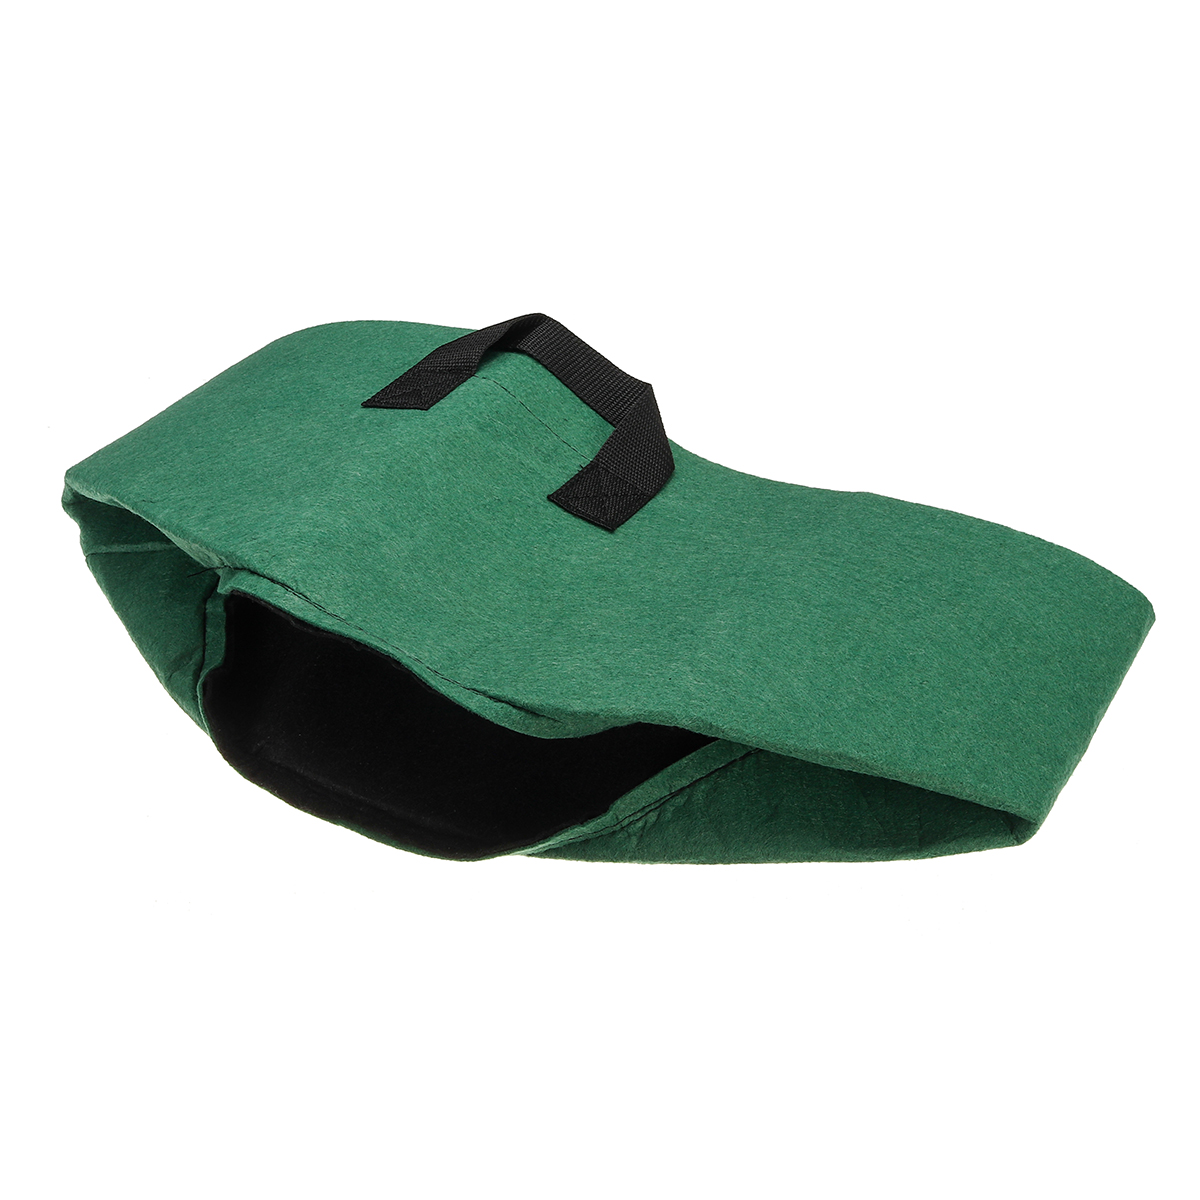 1235710Gallon-Felt-Non-Woven-Pots-Plant-Grow-Bag-Planting-Pouch-Container-Nursery-Seedling-Planting--1543442-10